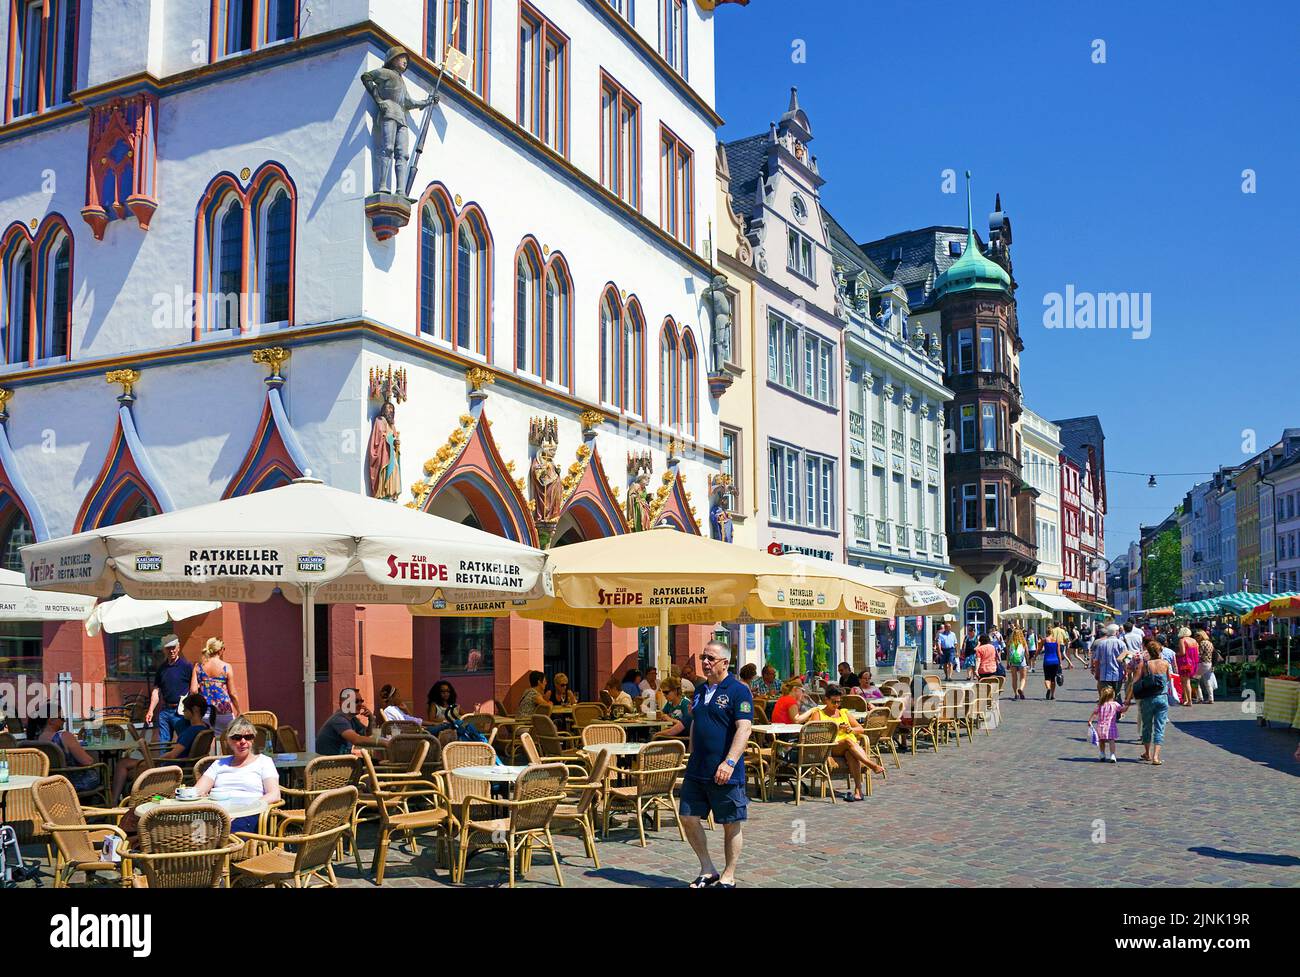 Ratskeller (Council house) with outside gastronomy, Trier, Rhineland-Palatinate, Germany, Europe Stock Photo